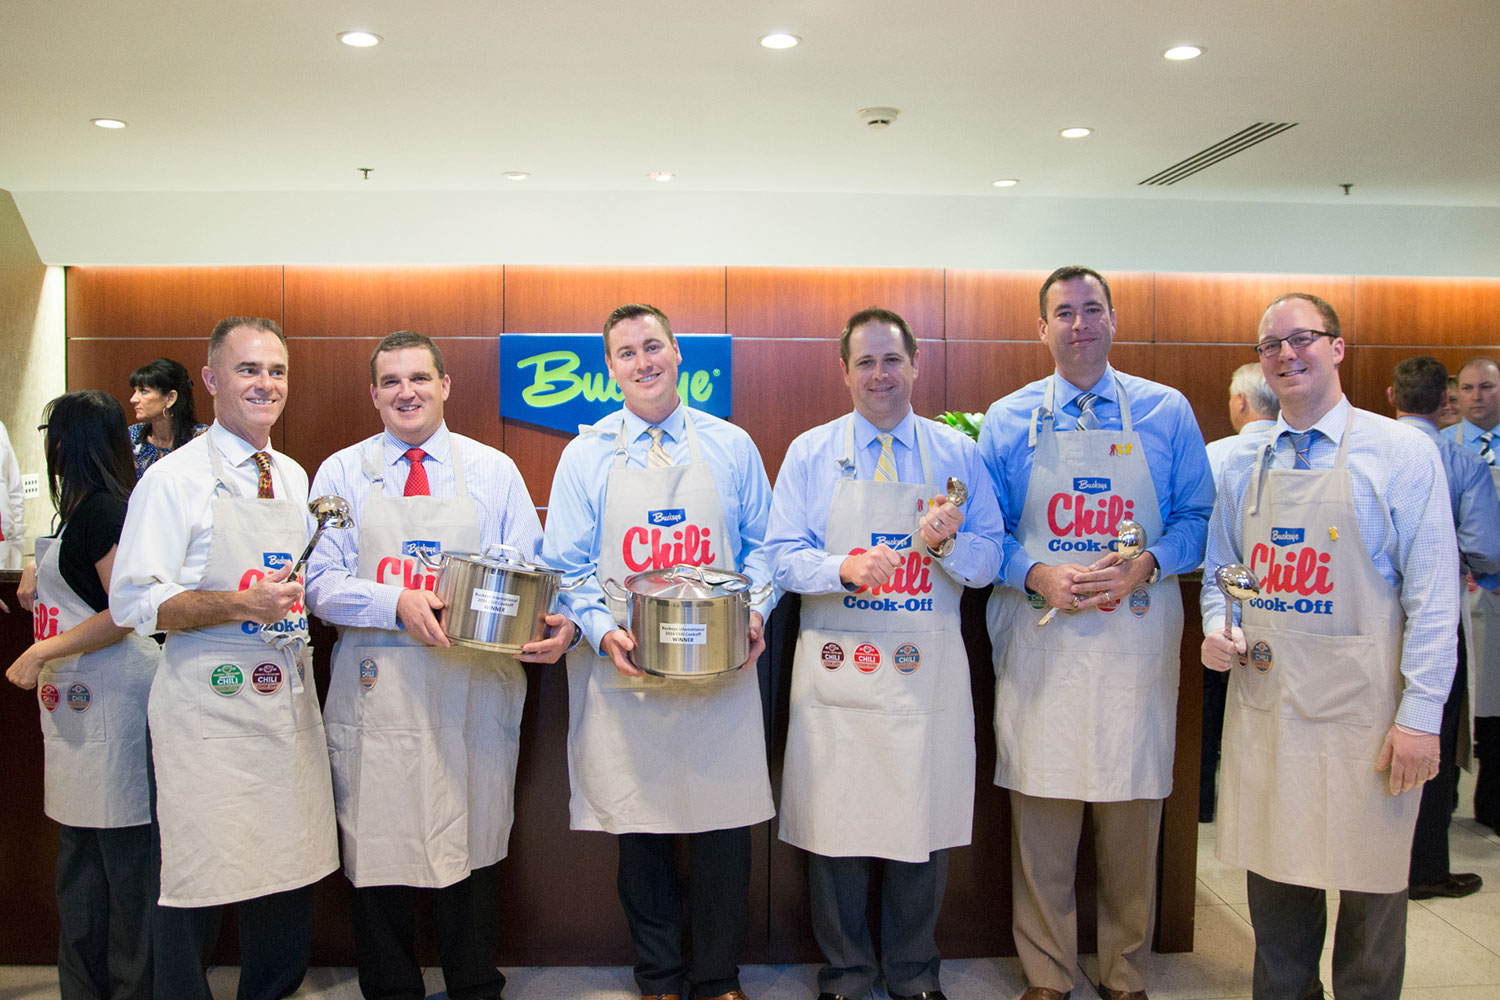 Winners of the Buckeye Chili Cookoff lined up in the lobby holidng stainless pots and laddles as their trophys.